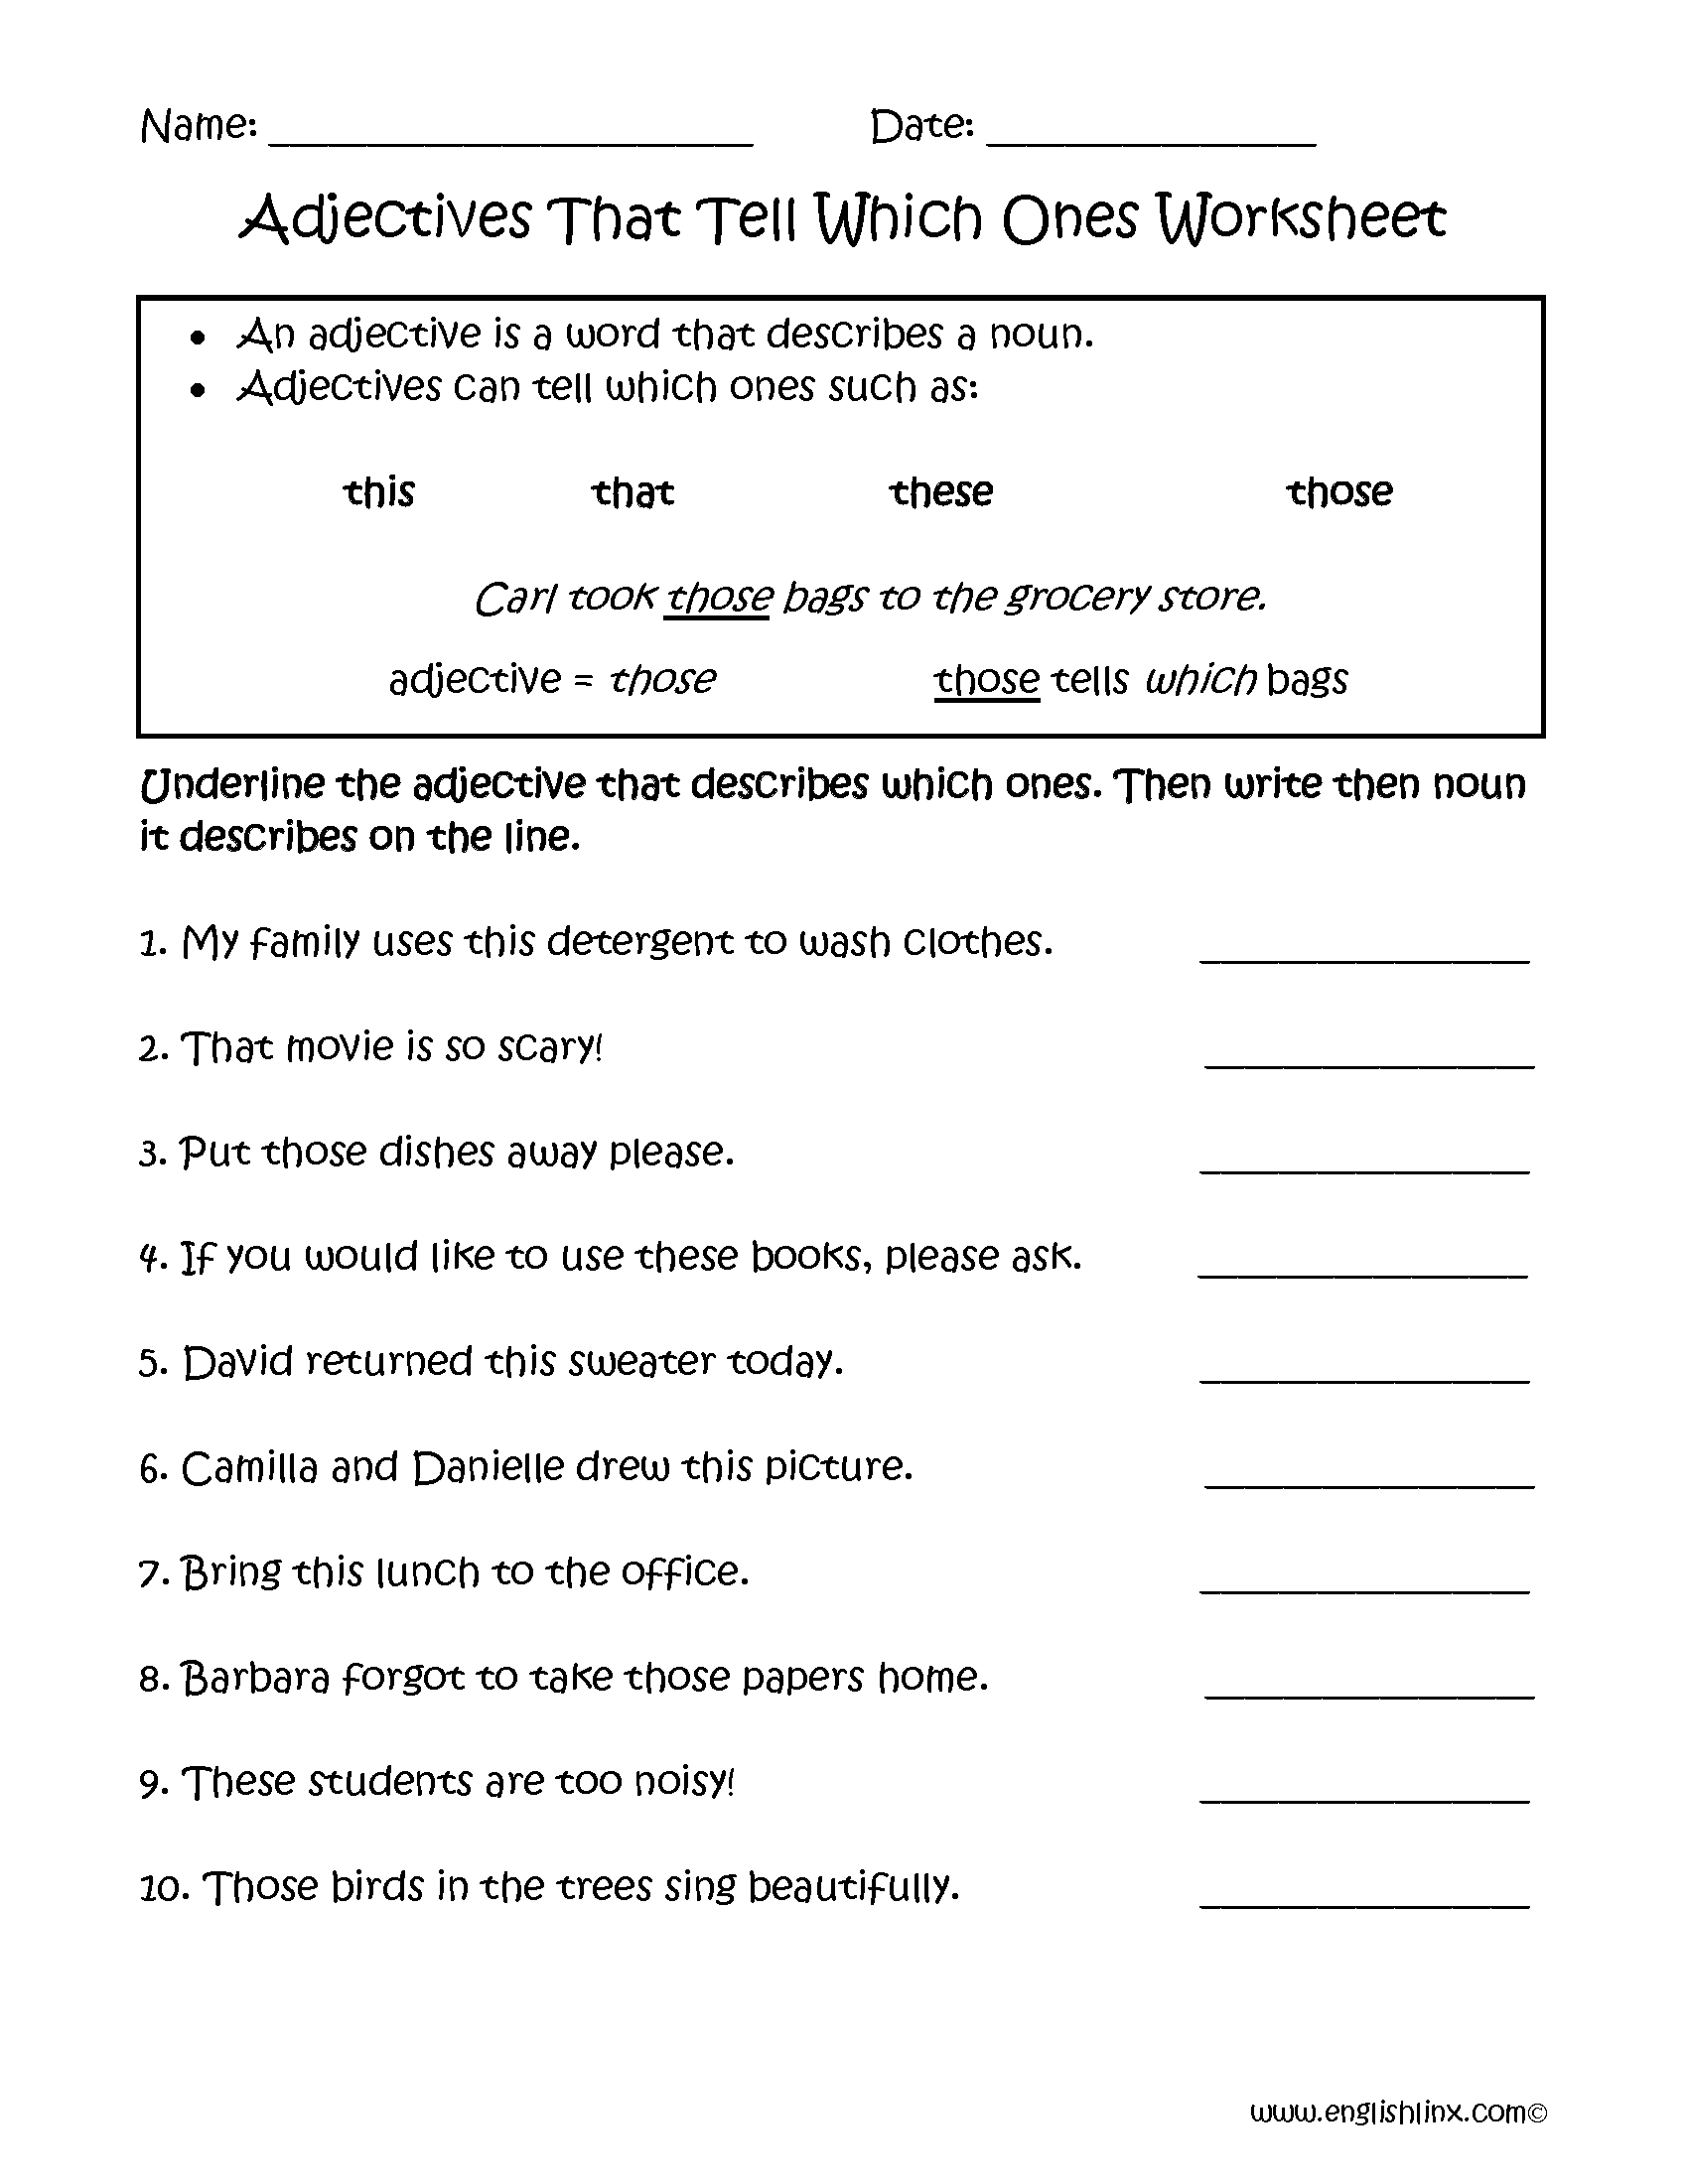 Regular Adjectives Worksheets  Adjectives That Tell Which One Or Words Used As Nouns And Adjectives Worksheet